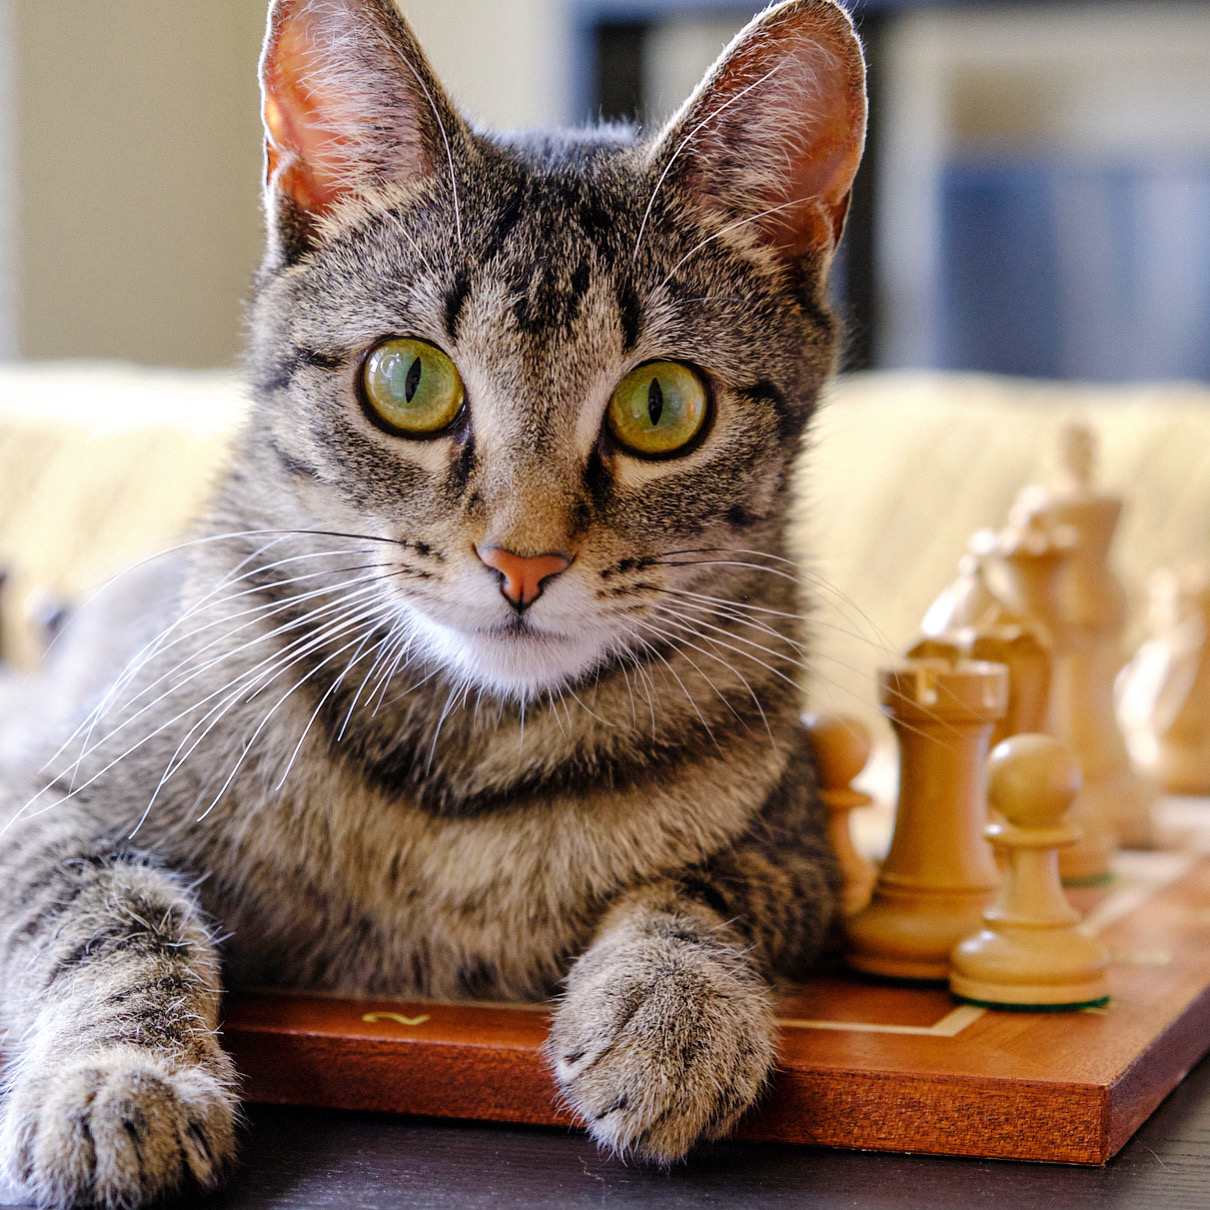 Penelope learning chess